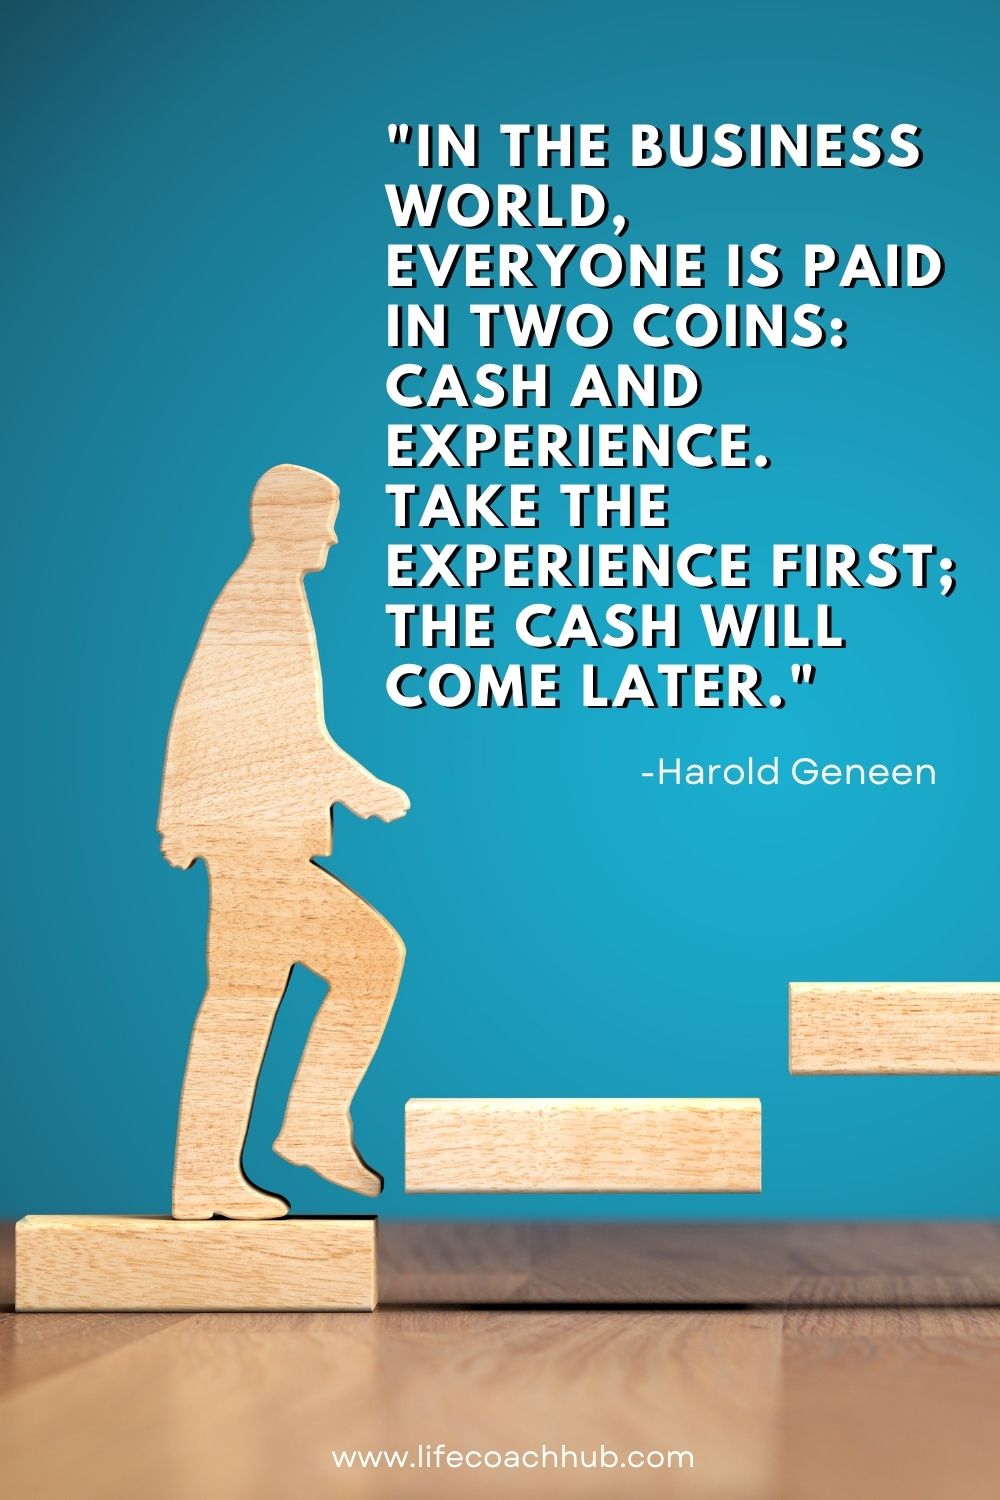 in the business world, everyone is paid in two coins: cash and experience